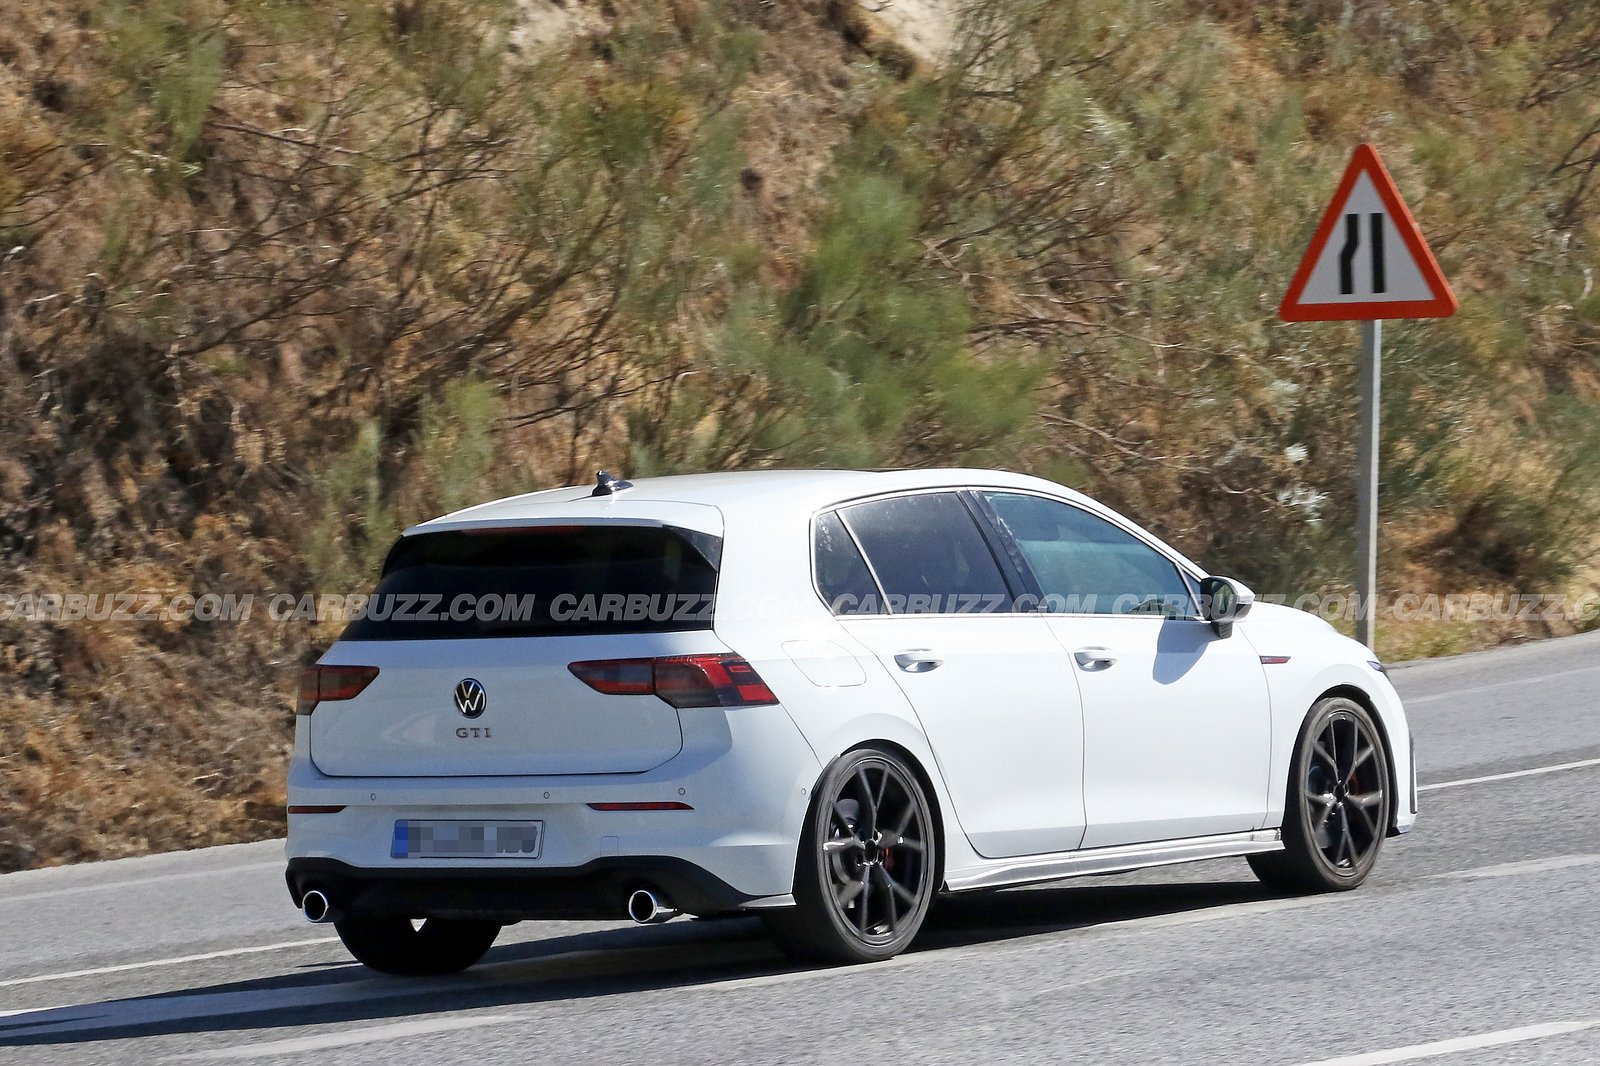 New Volkswagen Golf GTI Coming With Interesting Changes